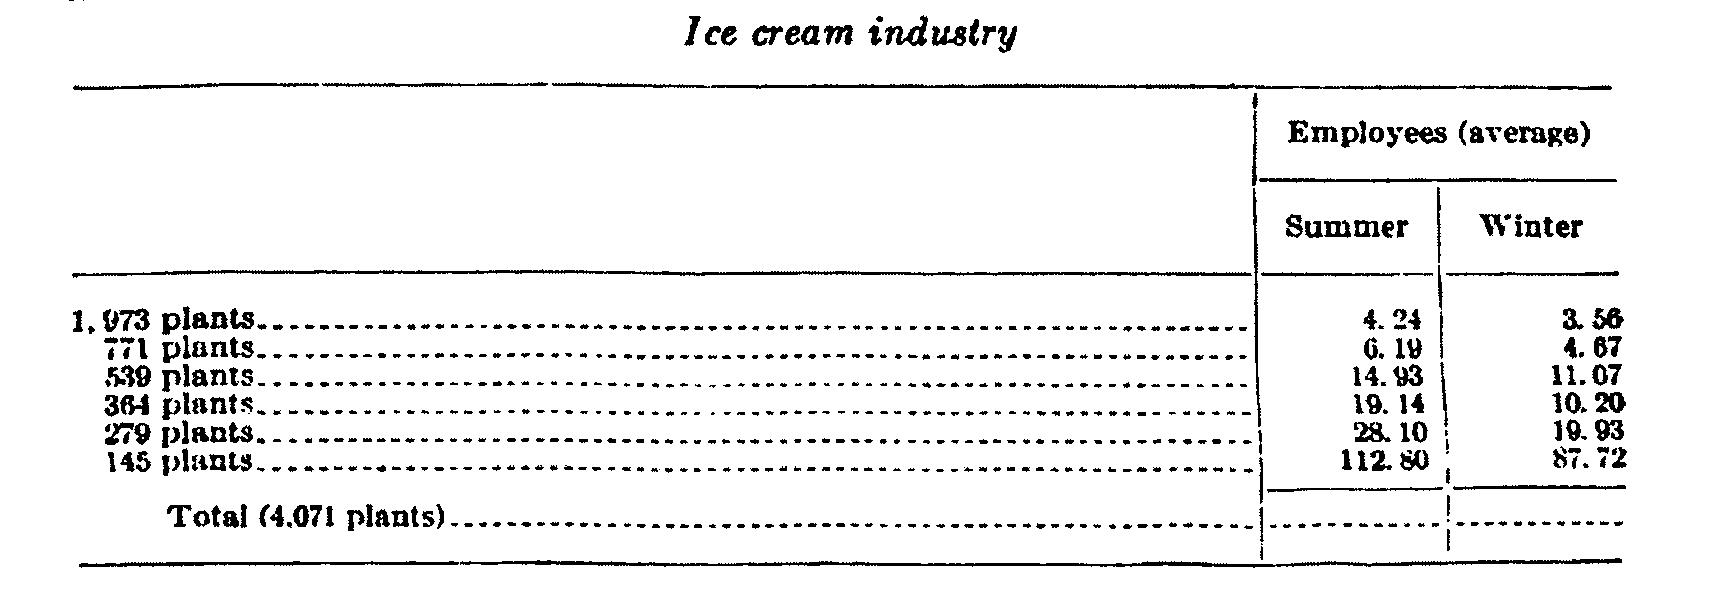 Page 1207 Ice cream industry